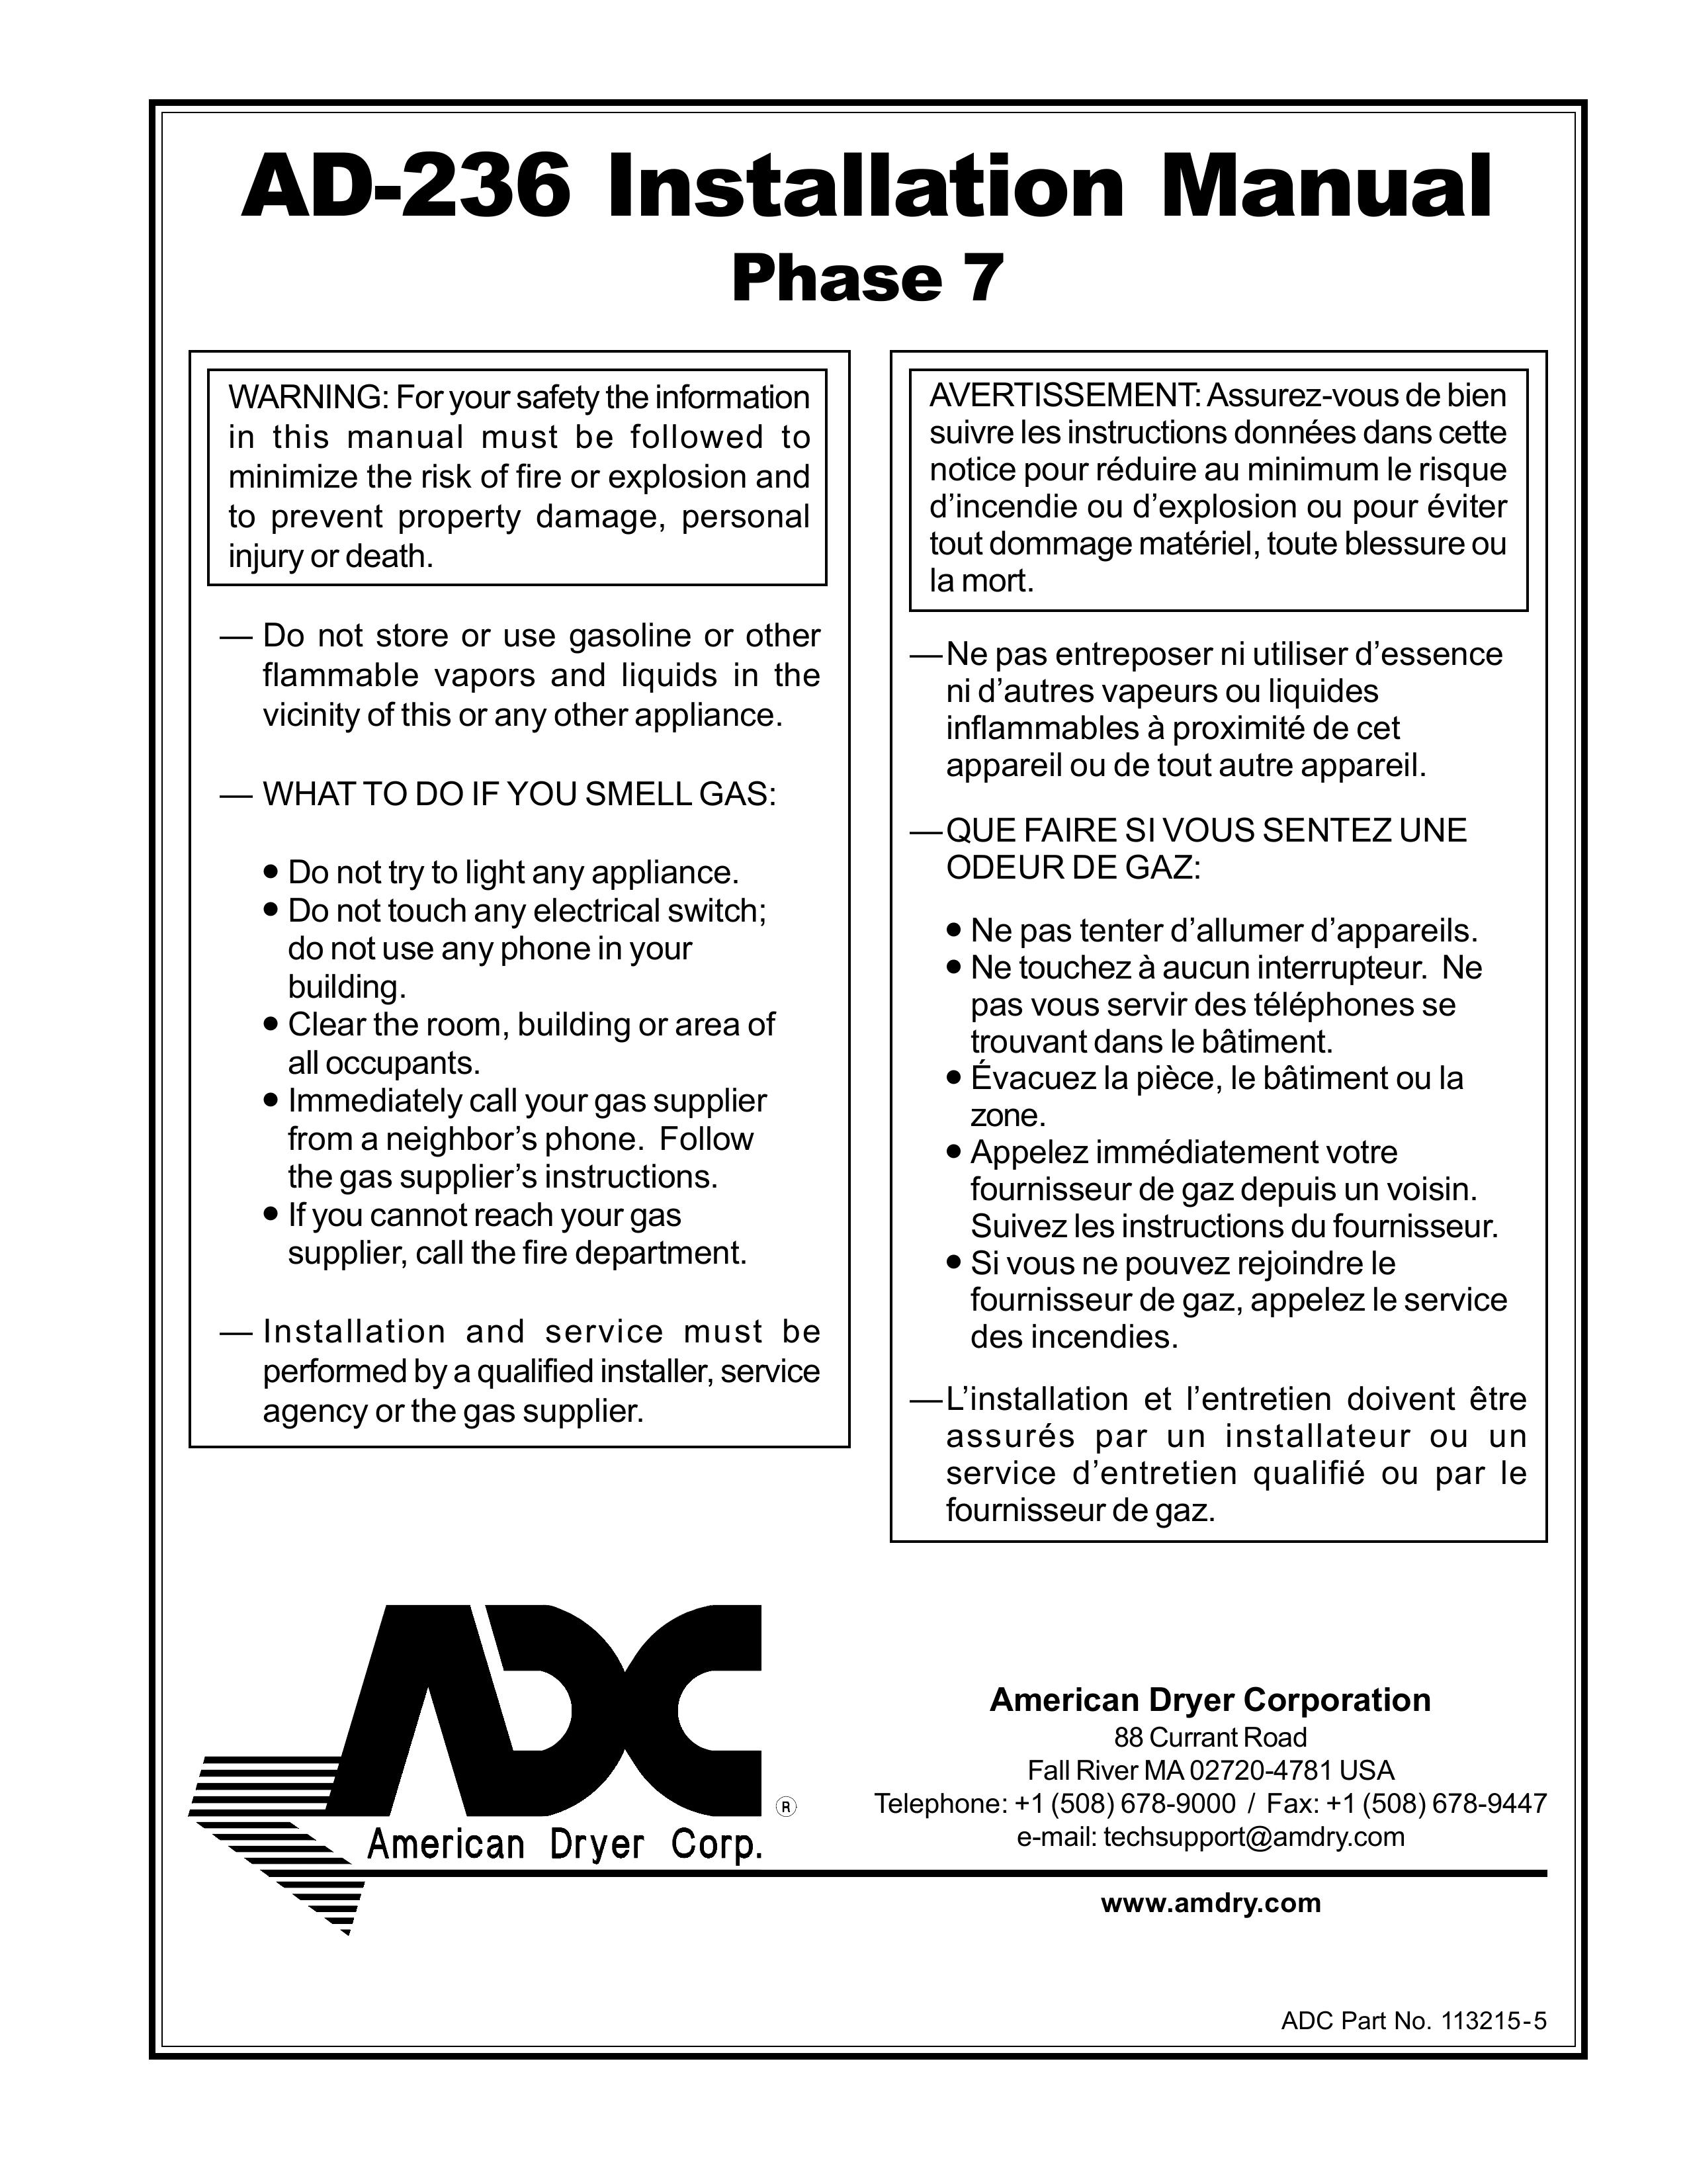 American Dryer Corp. AD-236 Clothes Dryer User Manual